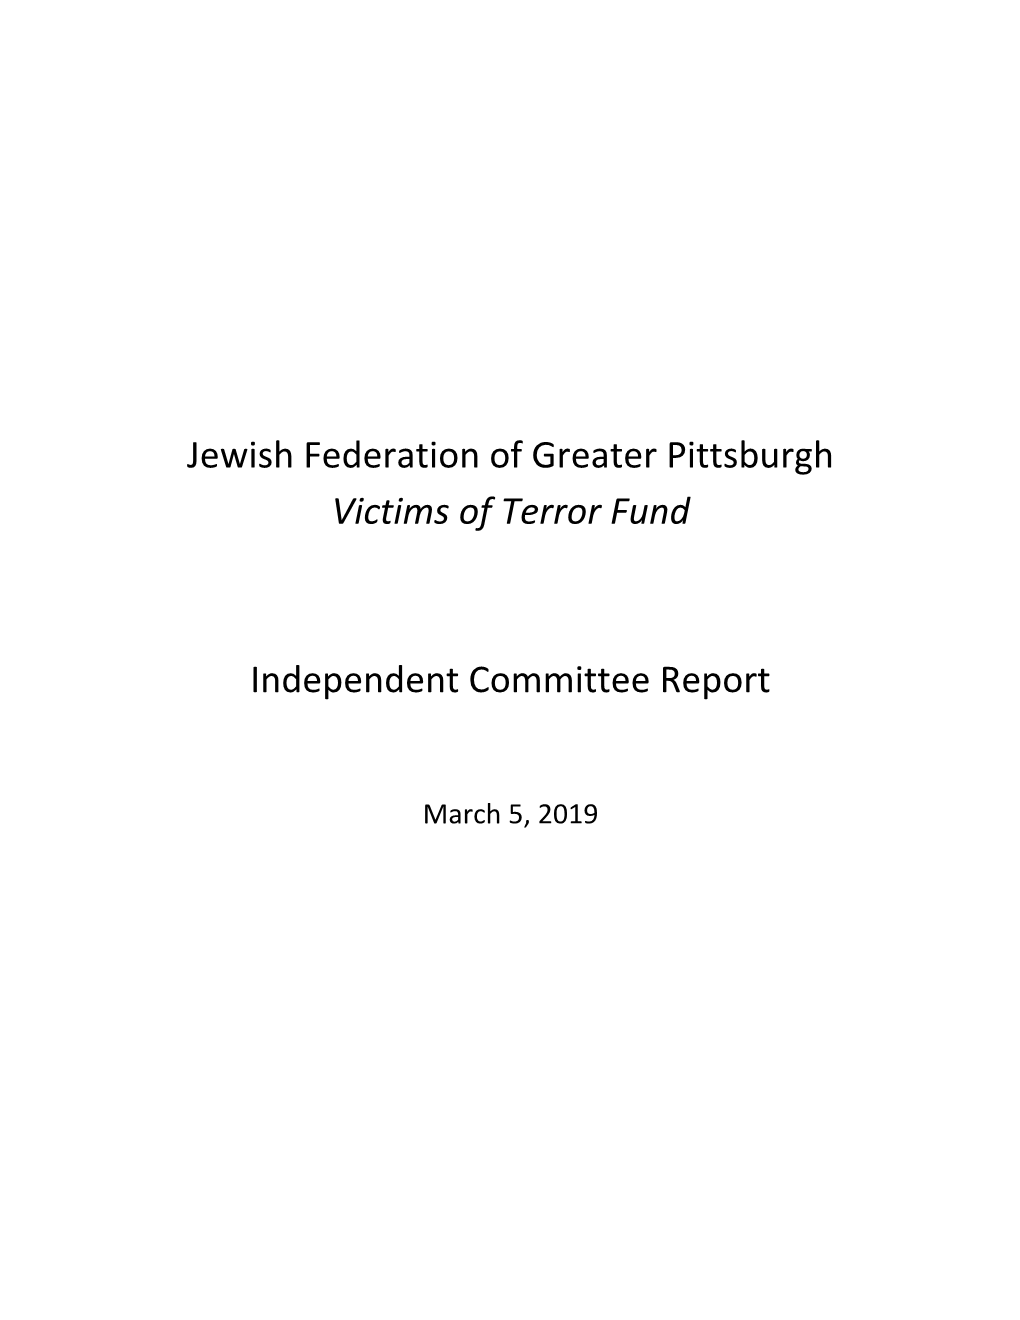 Victims of Terror Fund Independent Committee Report